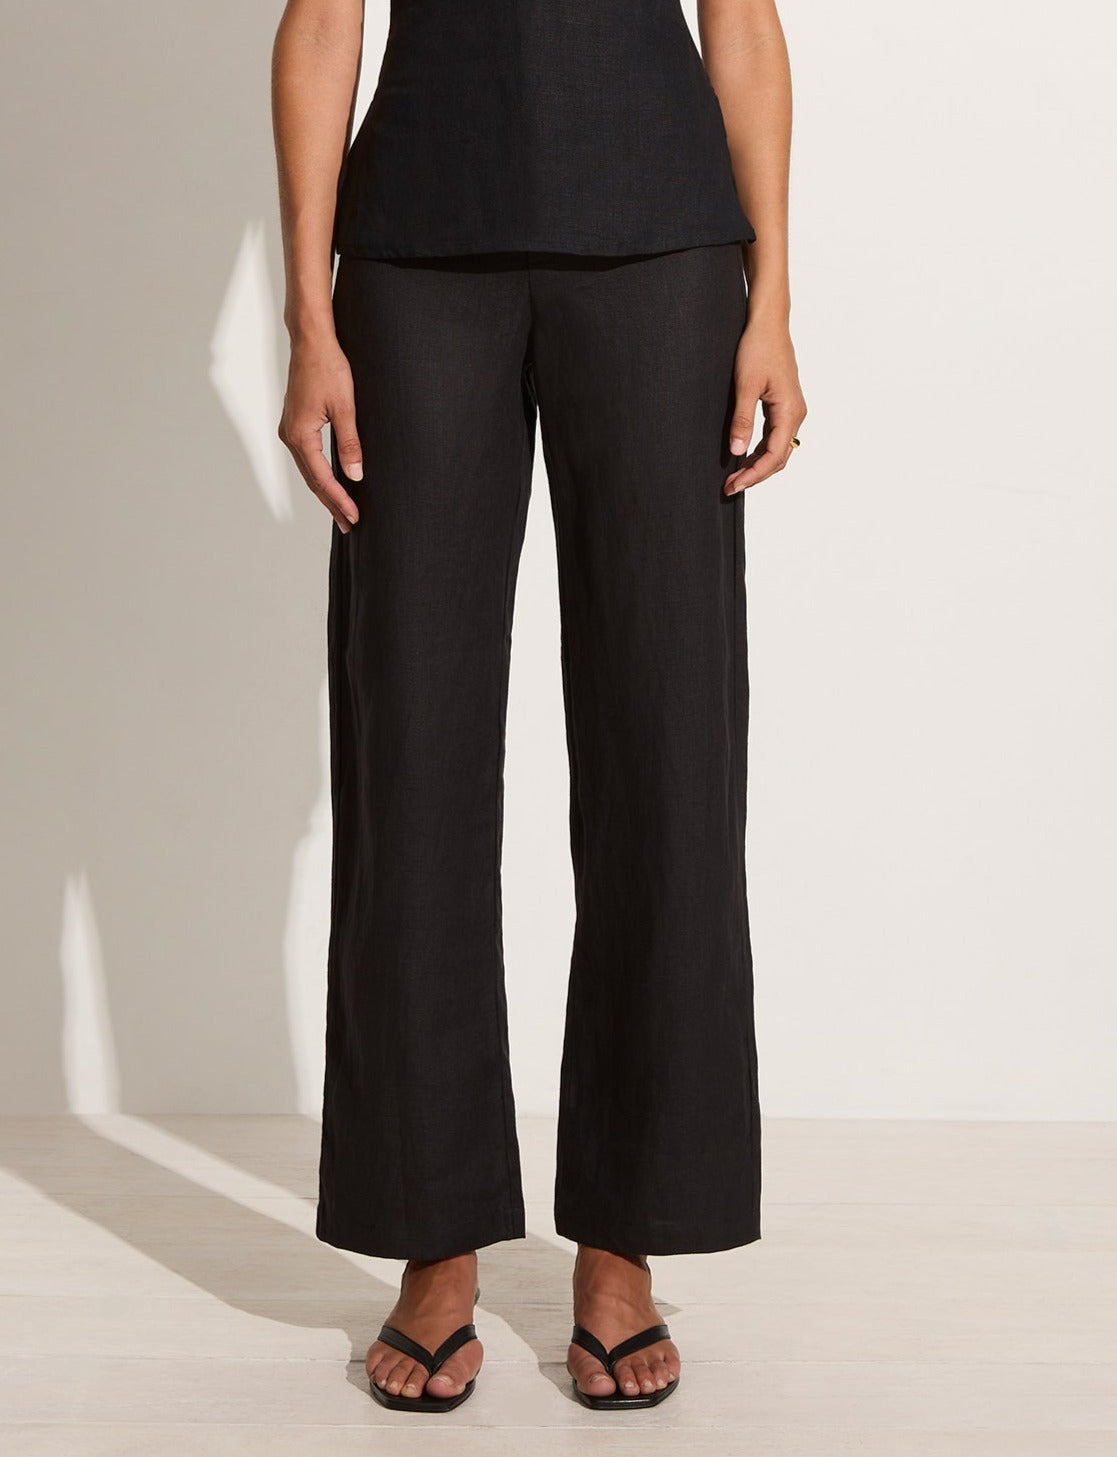 Vincente Pant Charcoal - Faithfull the Brand